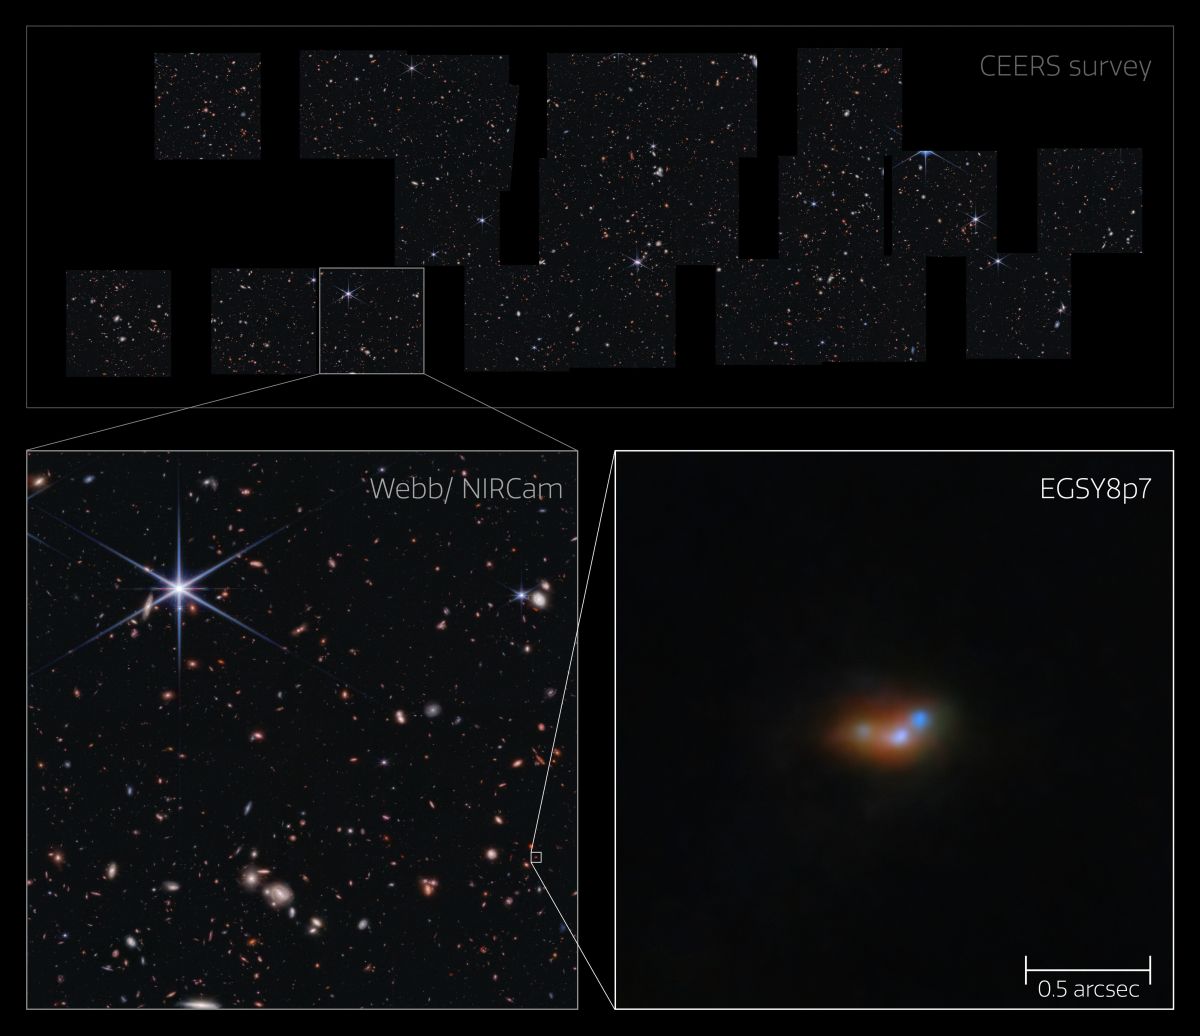 This image shows the galaxy EGSY8p7. This is a bright galaxy from the early Universe that exhibits especially light emission from excited hydrogen atoms (Lyman-alpha emission). Scientists are looking at this and other young galaxies to understand the role dark matter played in the early history of the universe.